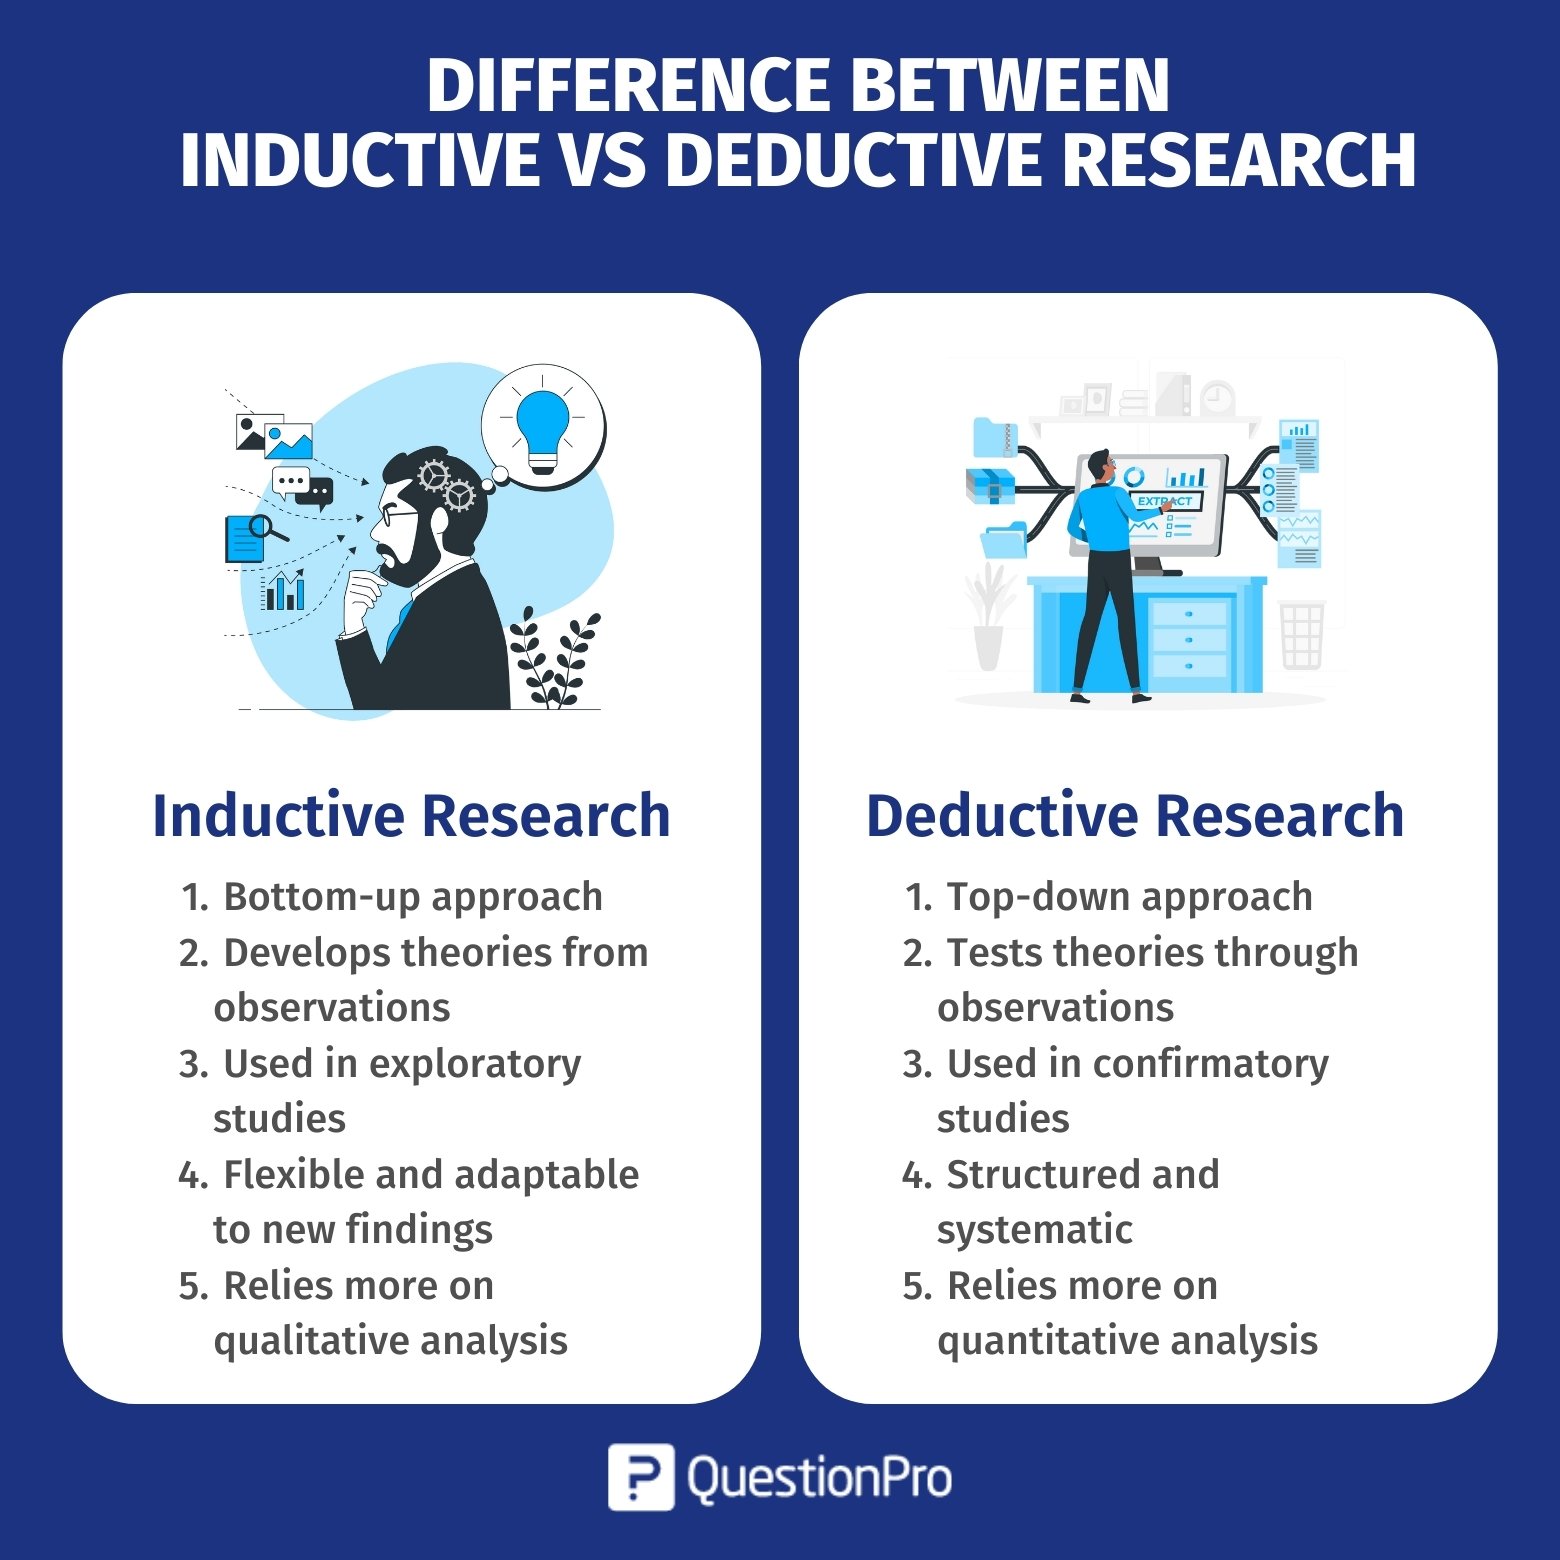 qualitative research is inductive in approach